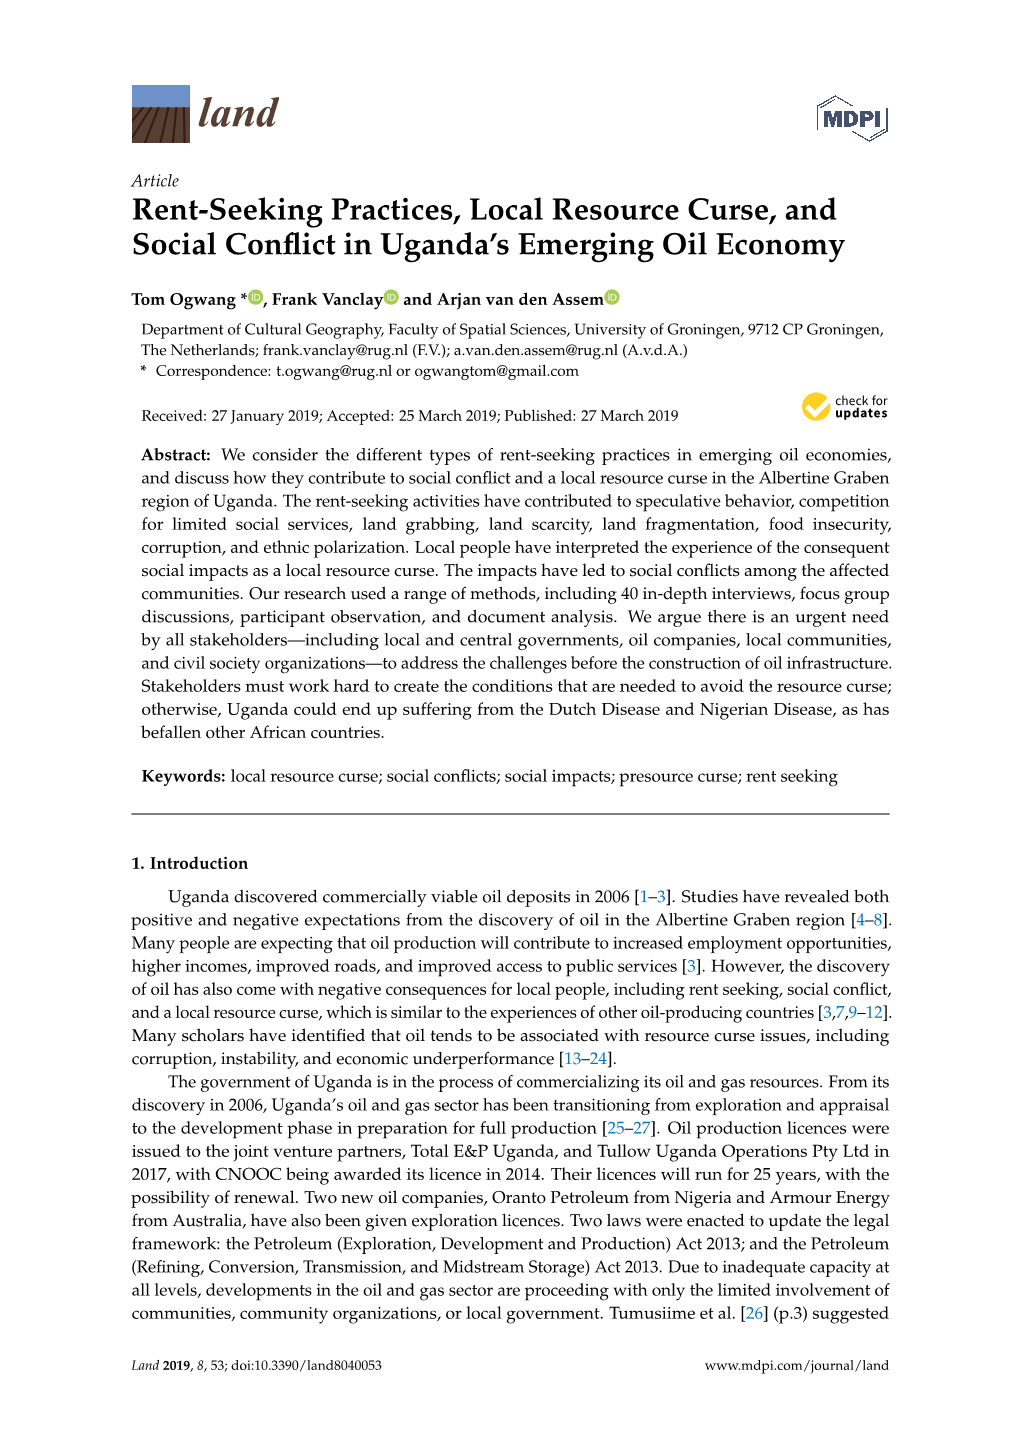 Rent-Seeking Practices, Local Resource Curse, and Social Conﬂict in Uganda’S Emerging Oil Economy